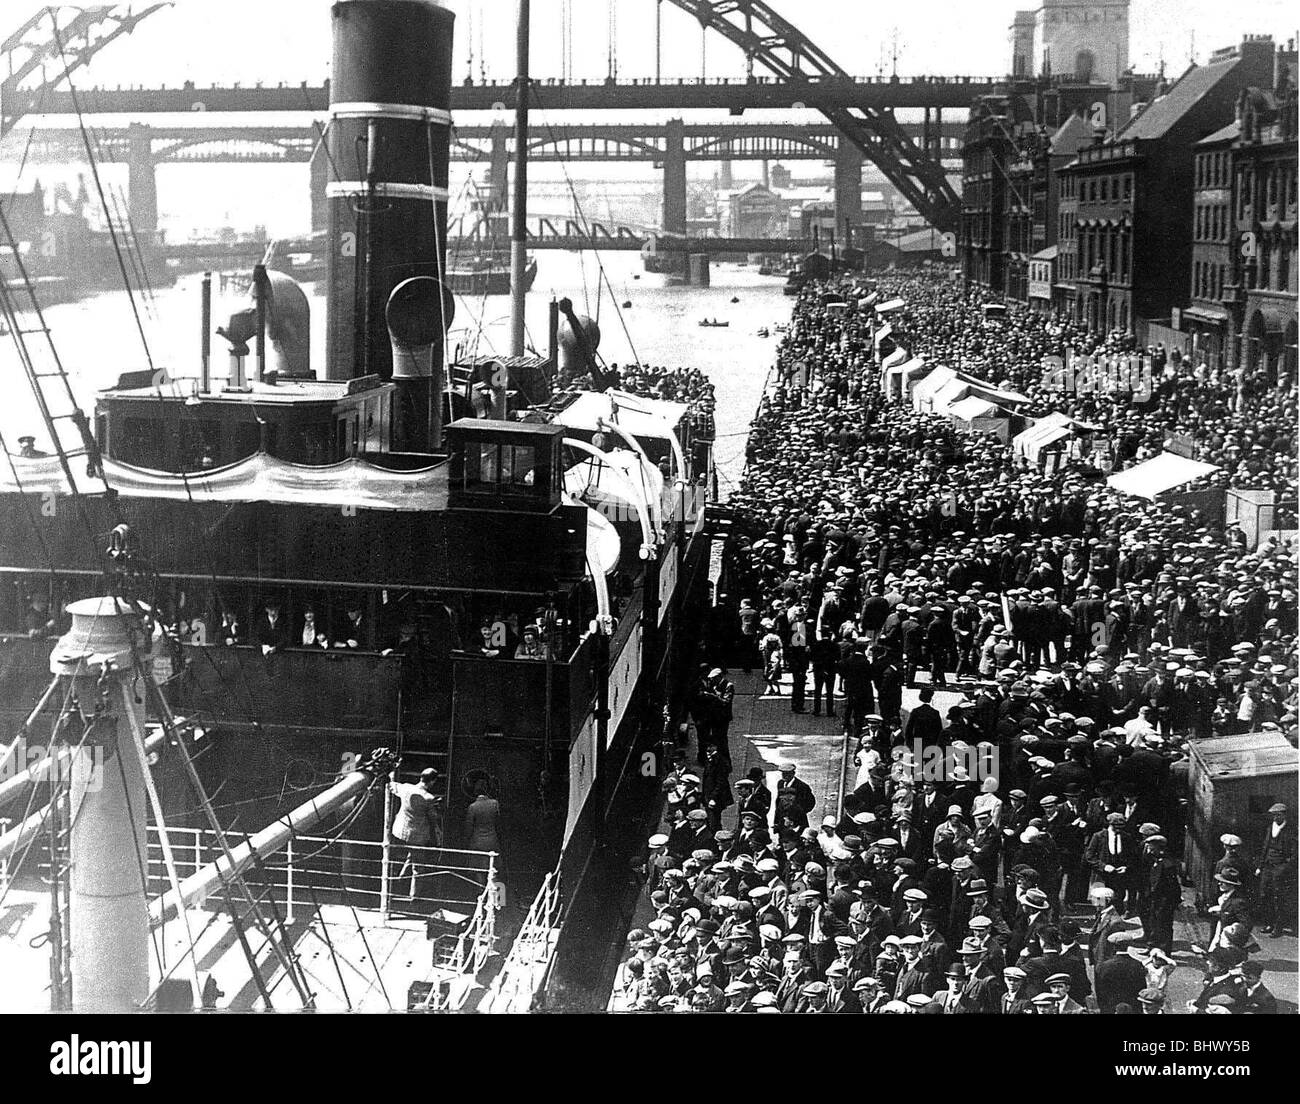 THE BERNICIA CARRYING NEWCASTLE UNITED FANS TO WEMBLY IN 1924. NEWCASTLE UNITED PLAYED ASTON VILLA IN THE FA CUP FINAL. Newcastle Quayside a few days before the 1932 FA Cup final. United’s supporters gather for what is now an unusual way of getting to the capital – by Tyne Tees Shipping Co. steamer down the North Sea! The trip cost 25 shillings (£1.25p) for a first-class return ticket. Stock Photo